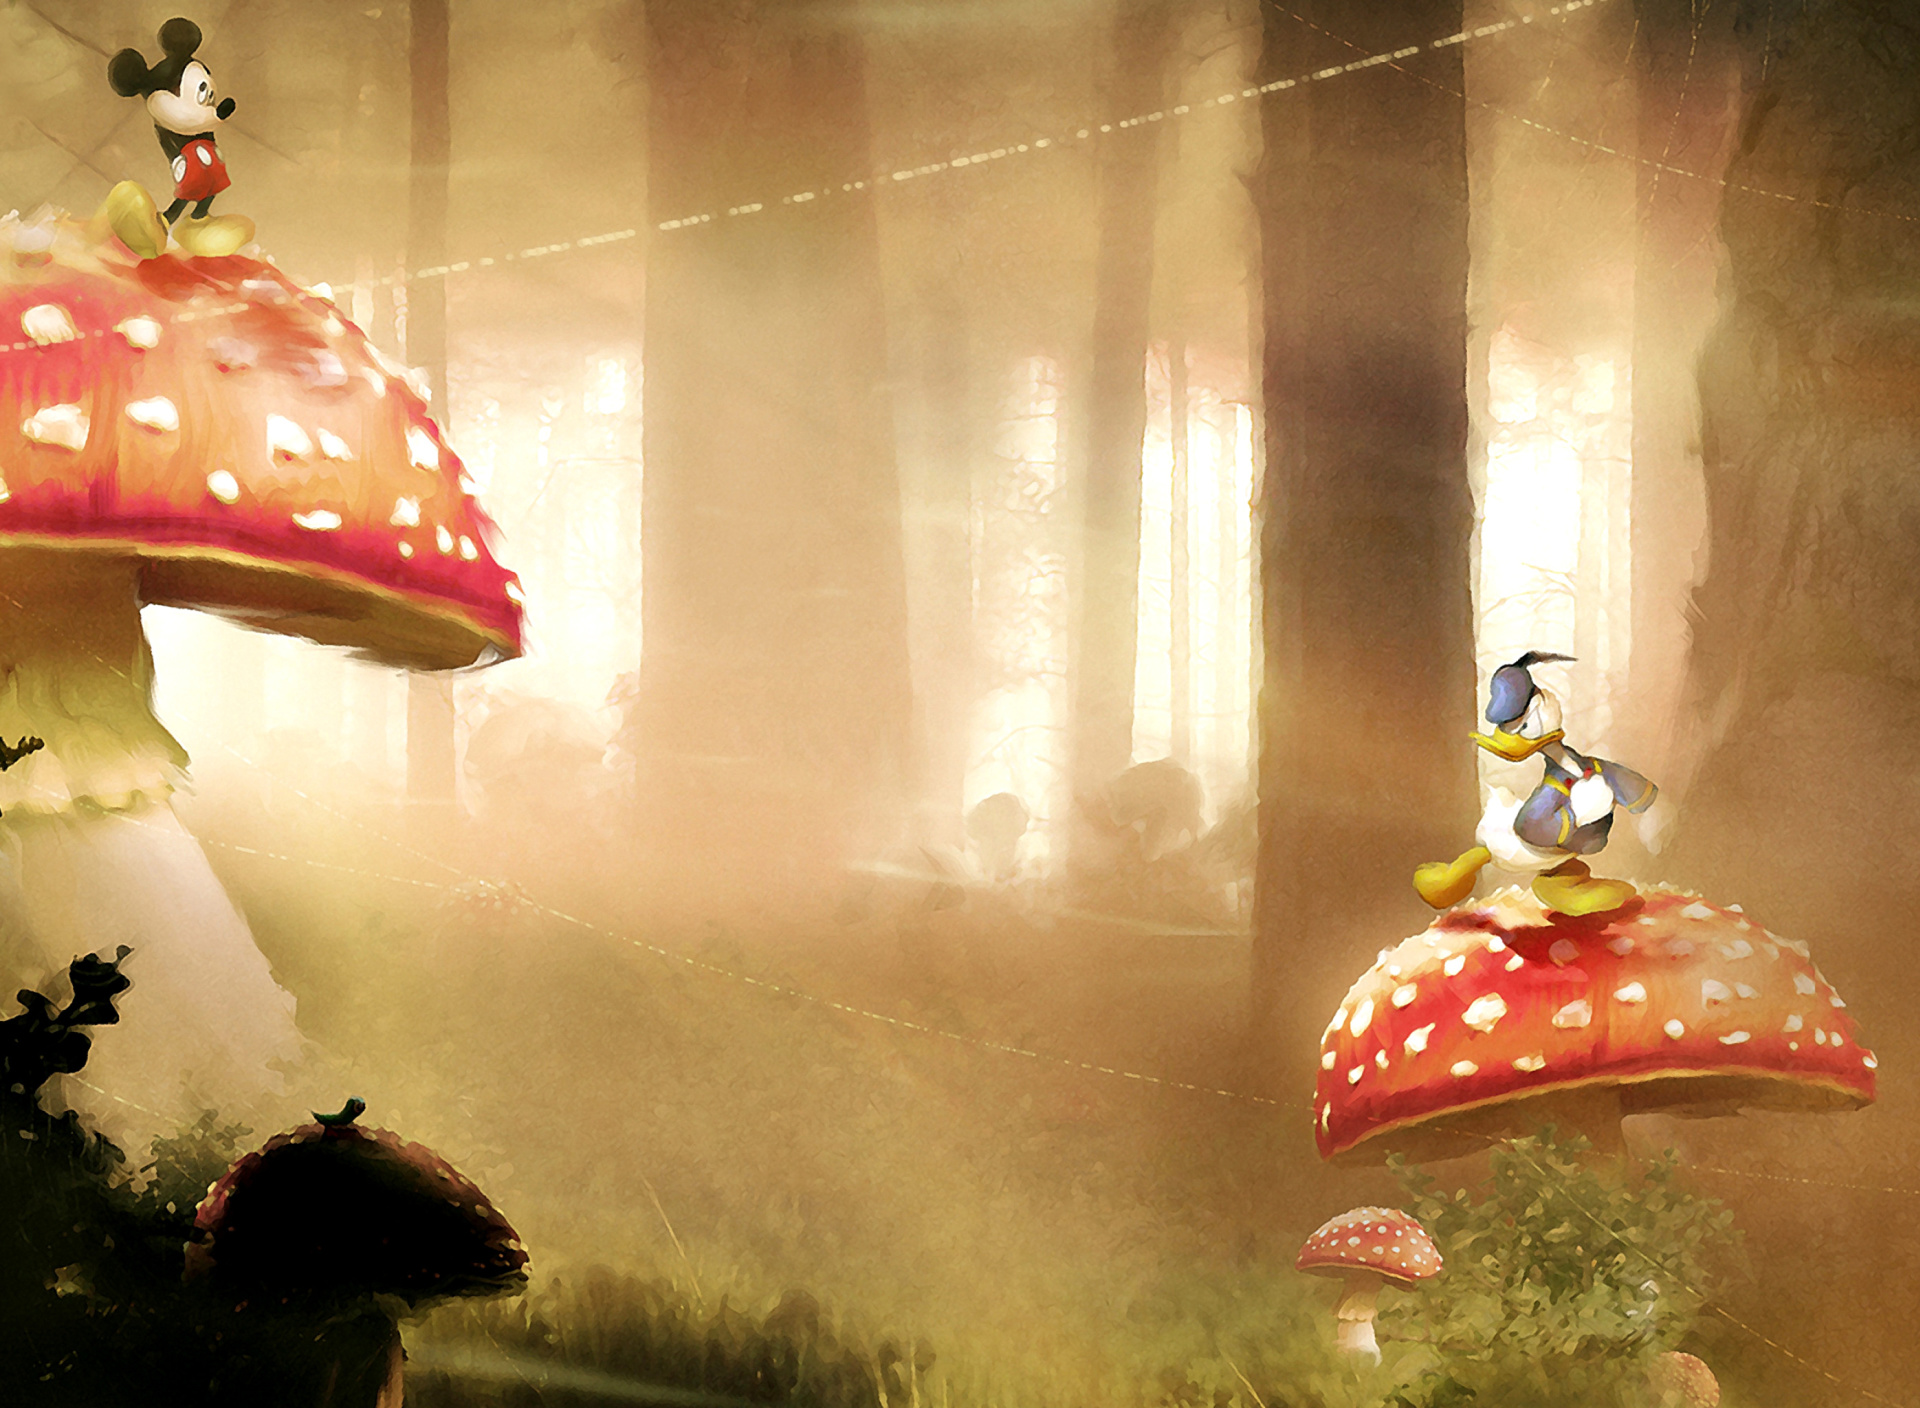 Mickey Mouse and Donald Duck wallpaper 1920x1408